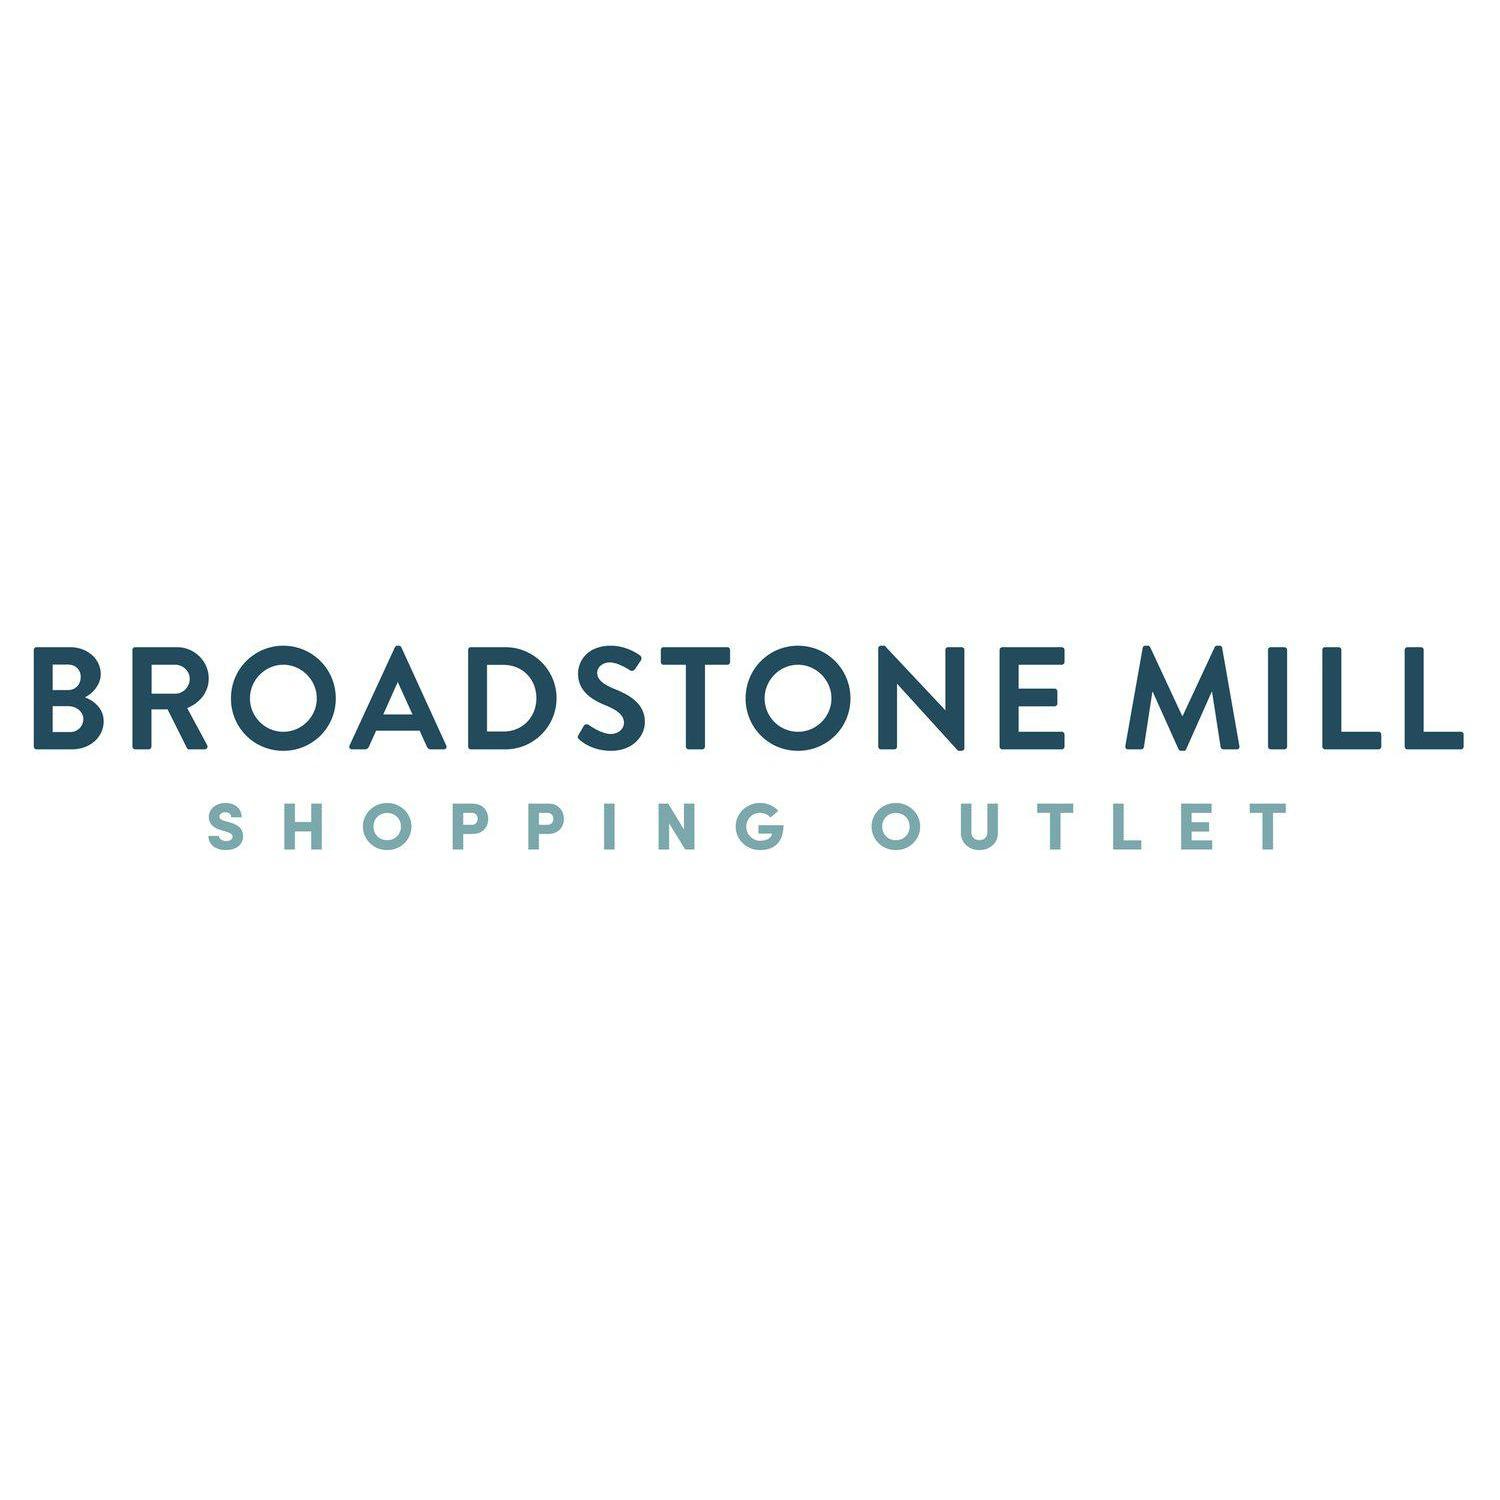 Broadstone Mill Shopping Outlet logo